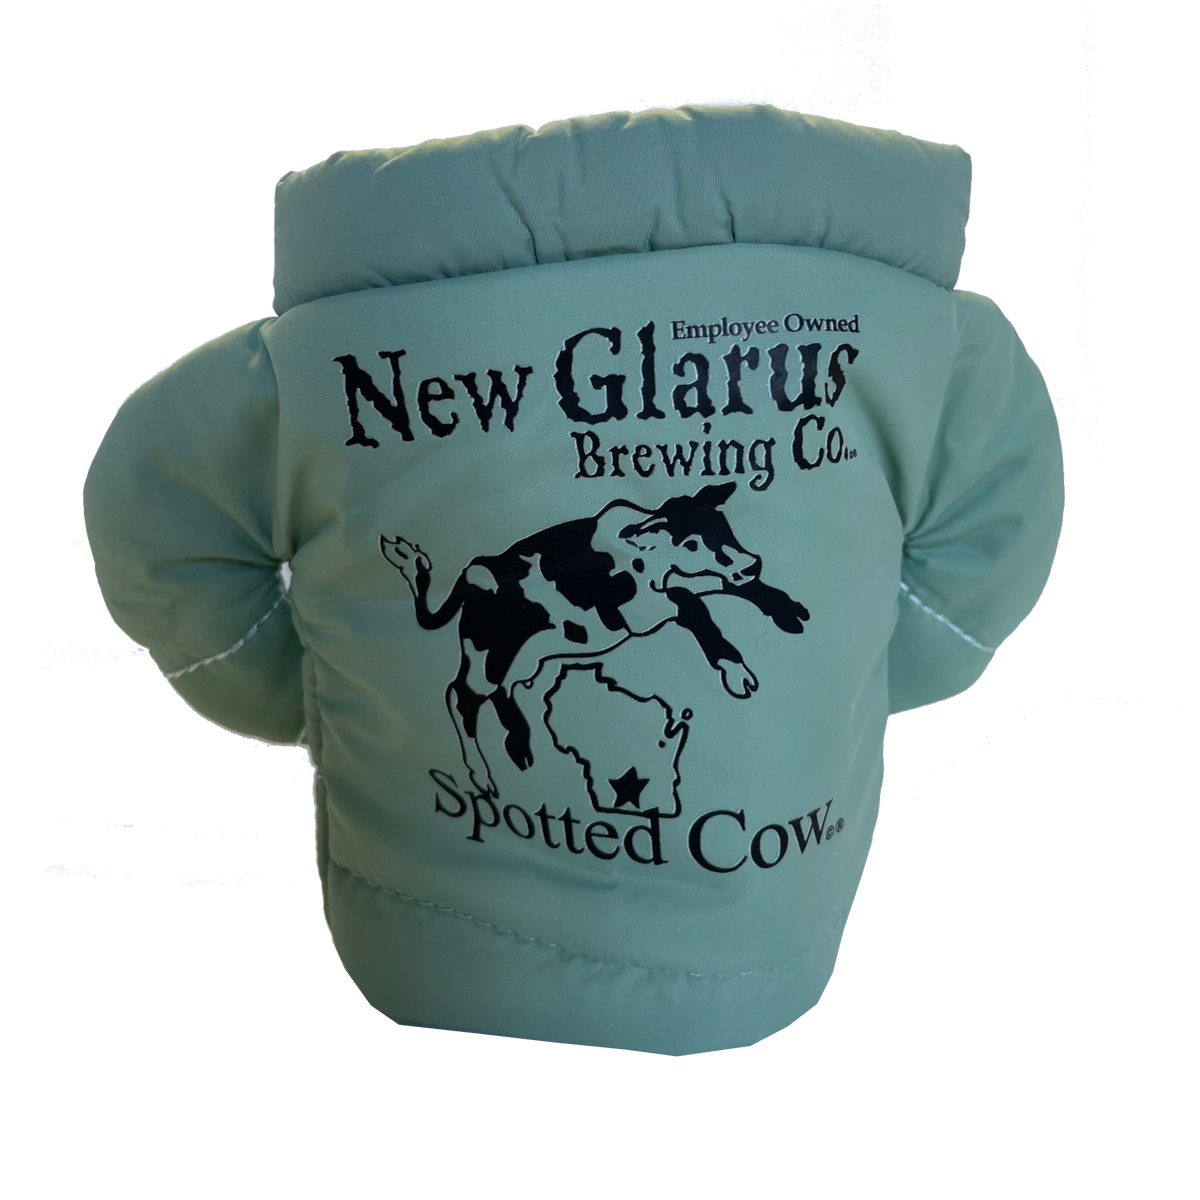 Light blue Jacket coozie with the Spotted Cow logo in black on the back.